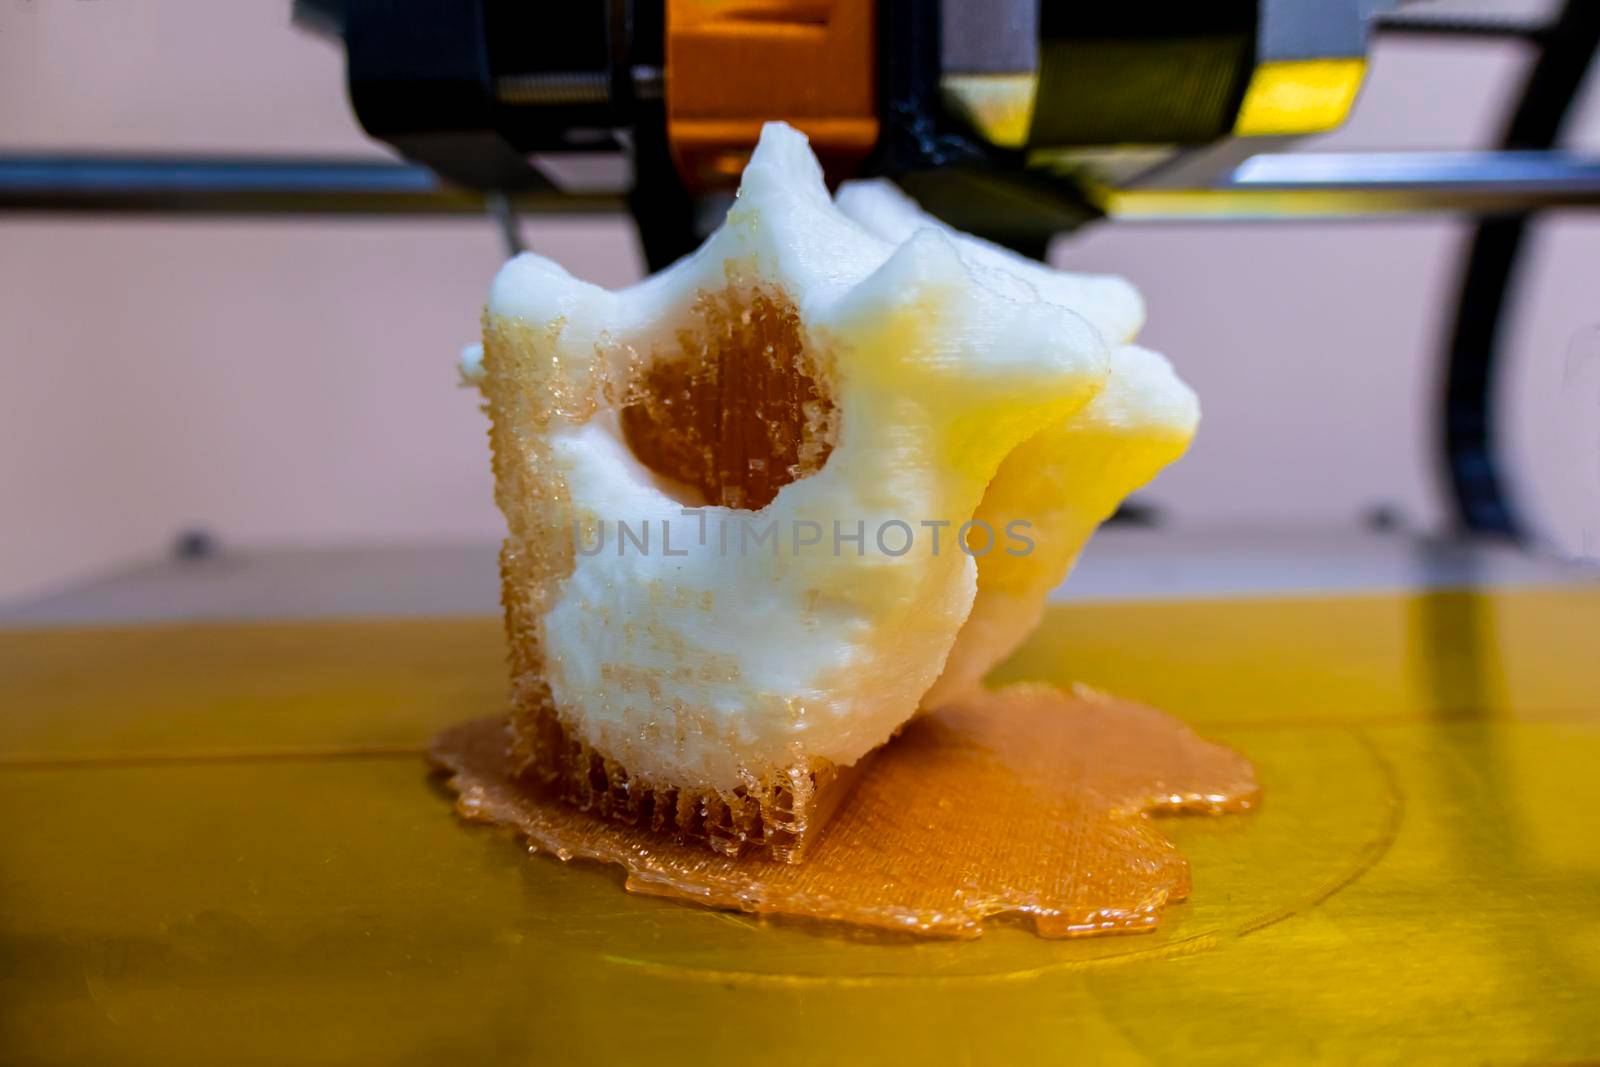 printing vertebrae on a 3d printer. artificial body parts printed on a 3d printer. New era of medicine. printing on a 3d printer. orange trident is printed with plastic on a 3d printer